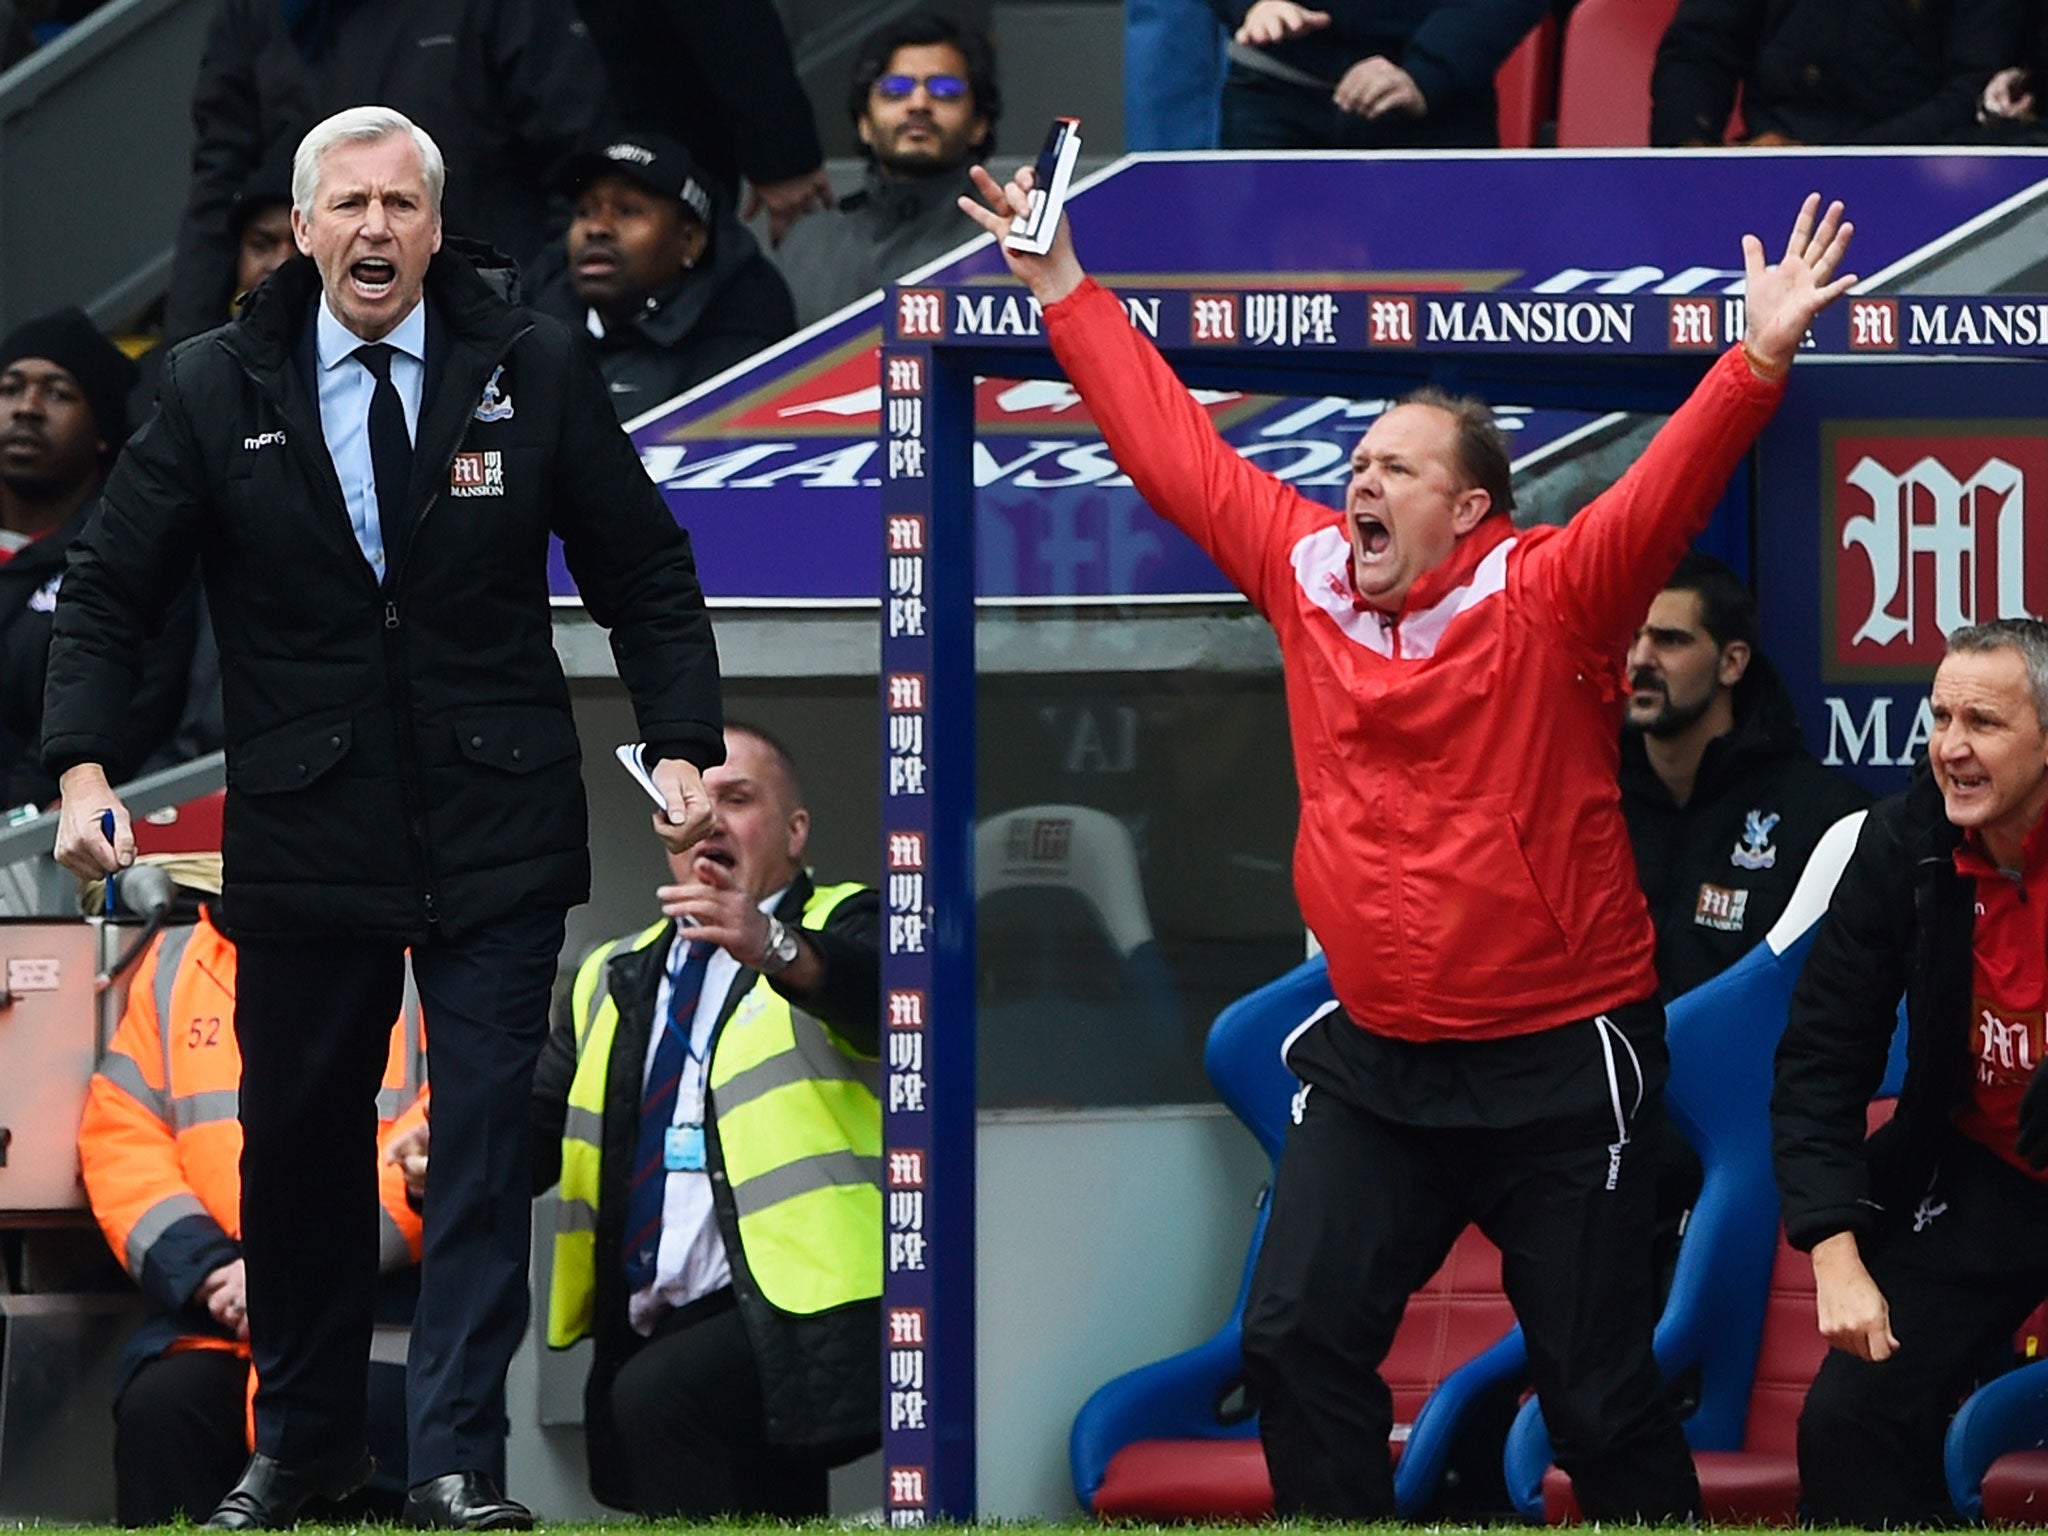 Alan Pardew reacts on the sideline during Crystal Palace's 2-1 loss to Liverpool